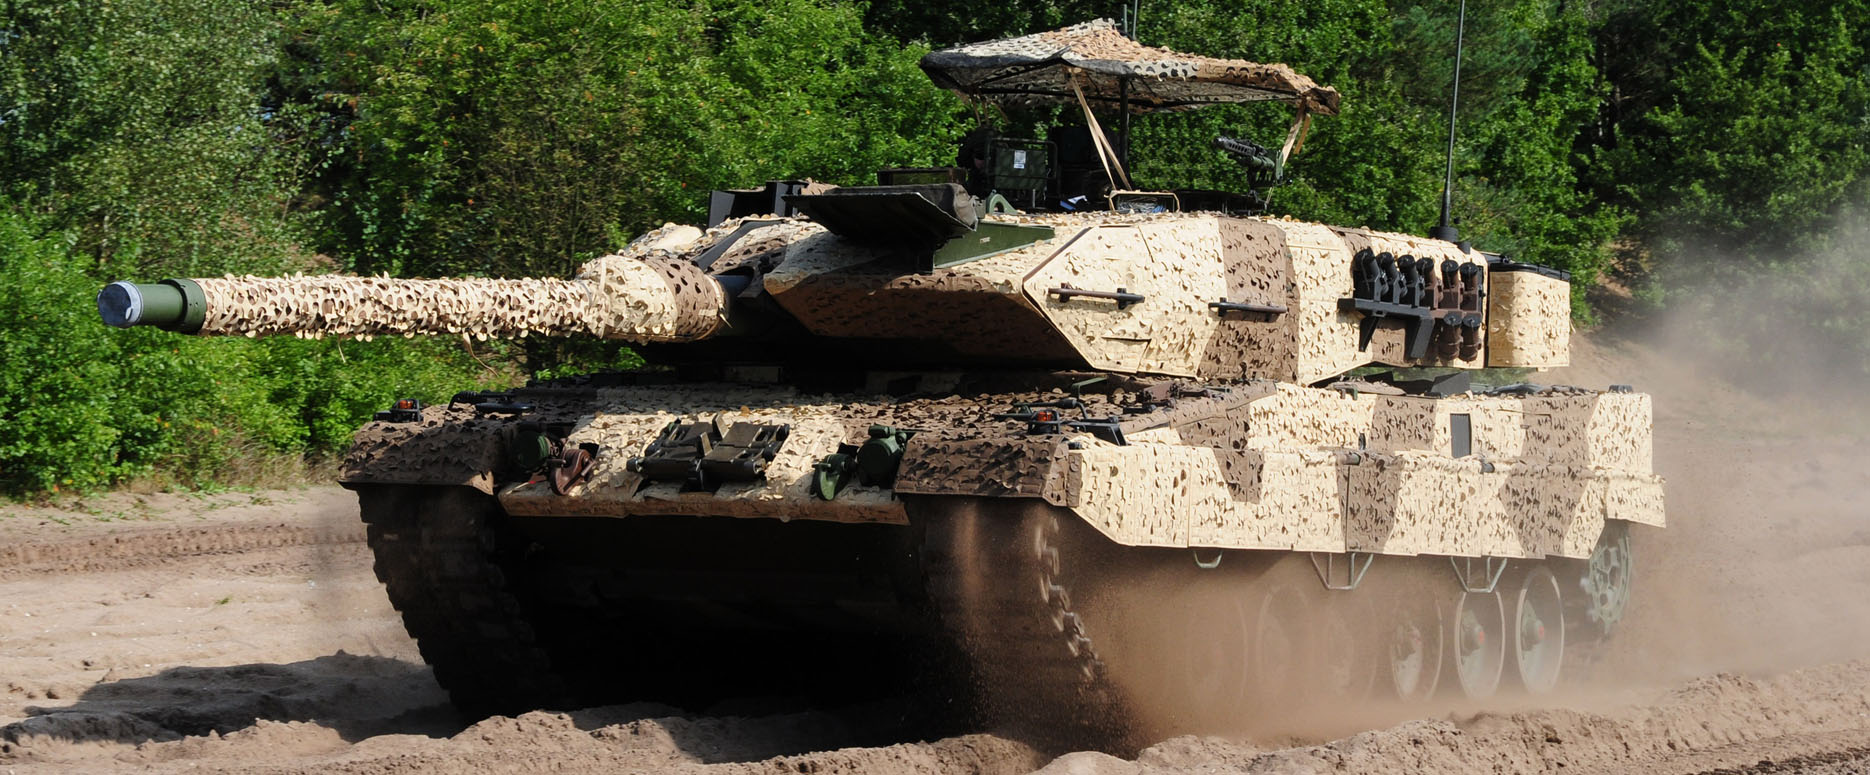 LEOPARD 2 main battle tank driving through dry soil at the edge of a forest